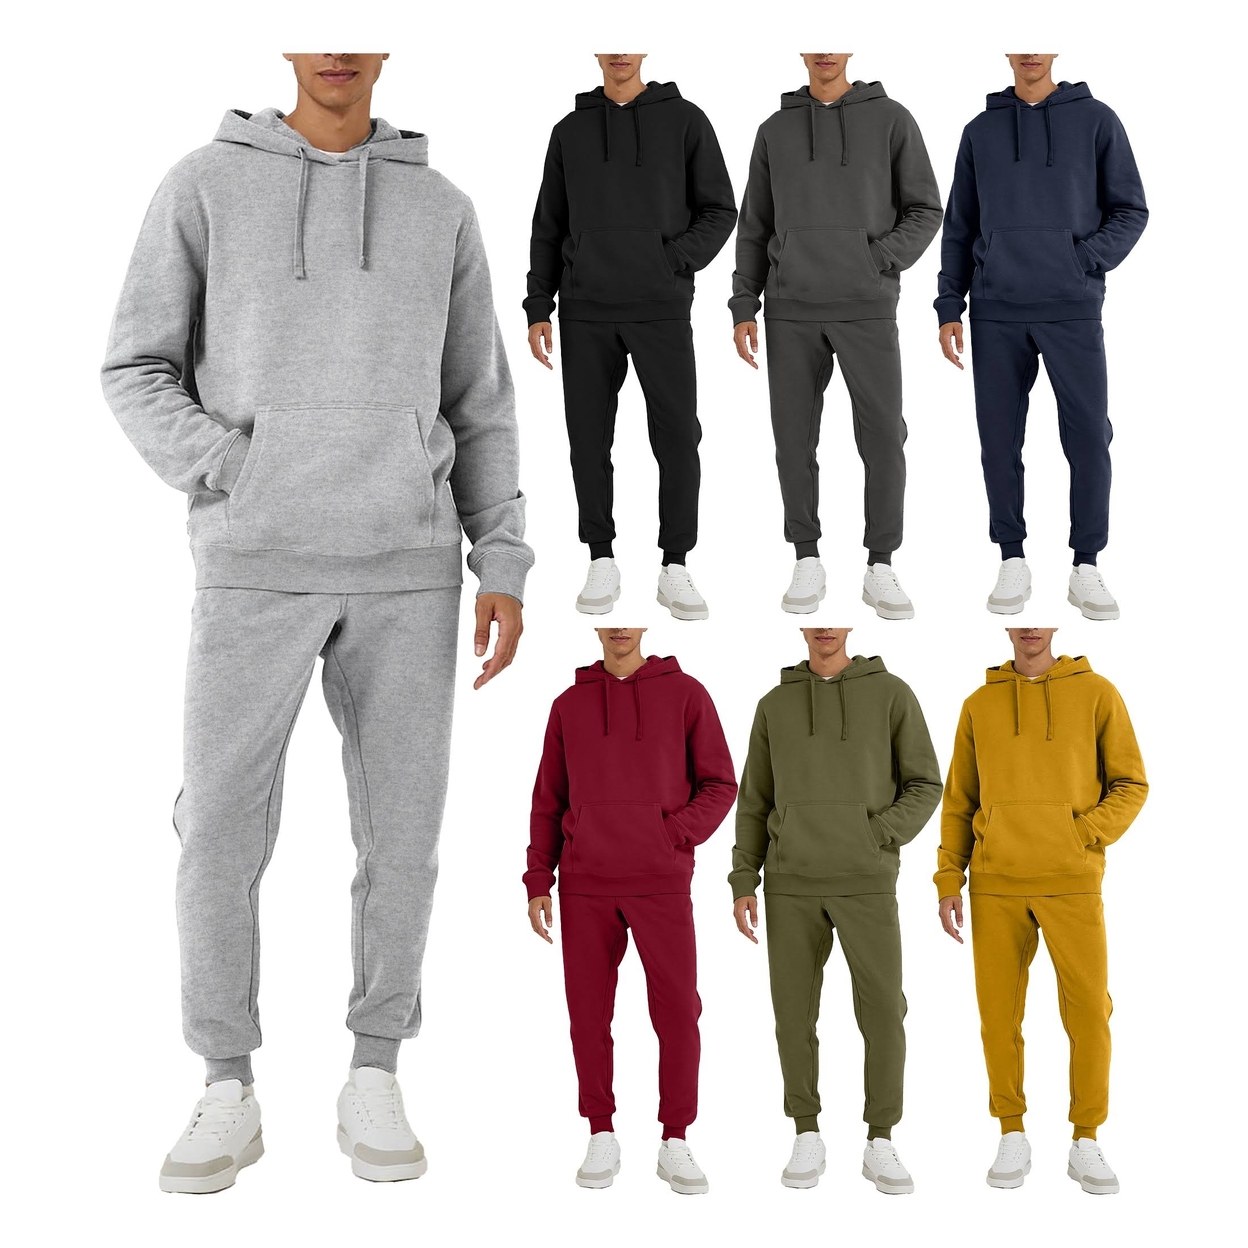 Men's Big & Tall Athletic Active Jogging Winter Warm Fleece Lined Pullover Tracksuit Set - Grey, Xx-large